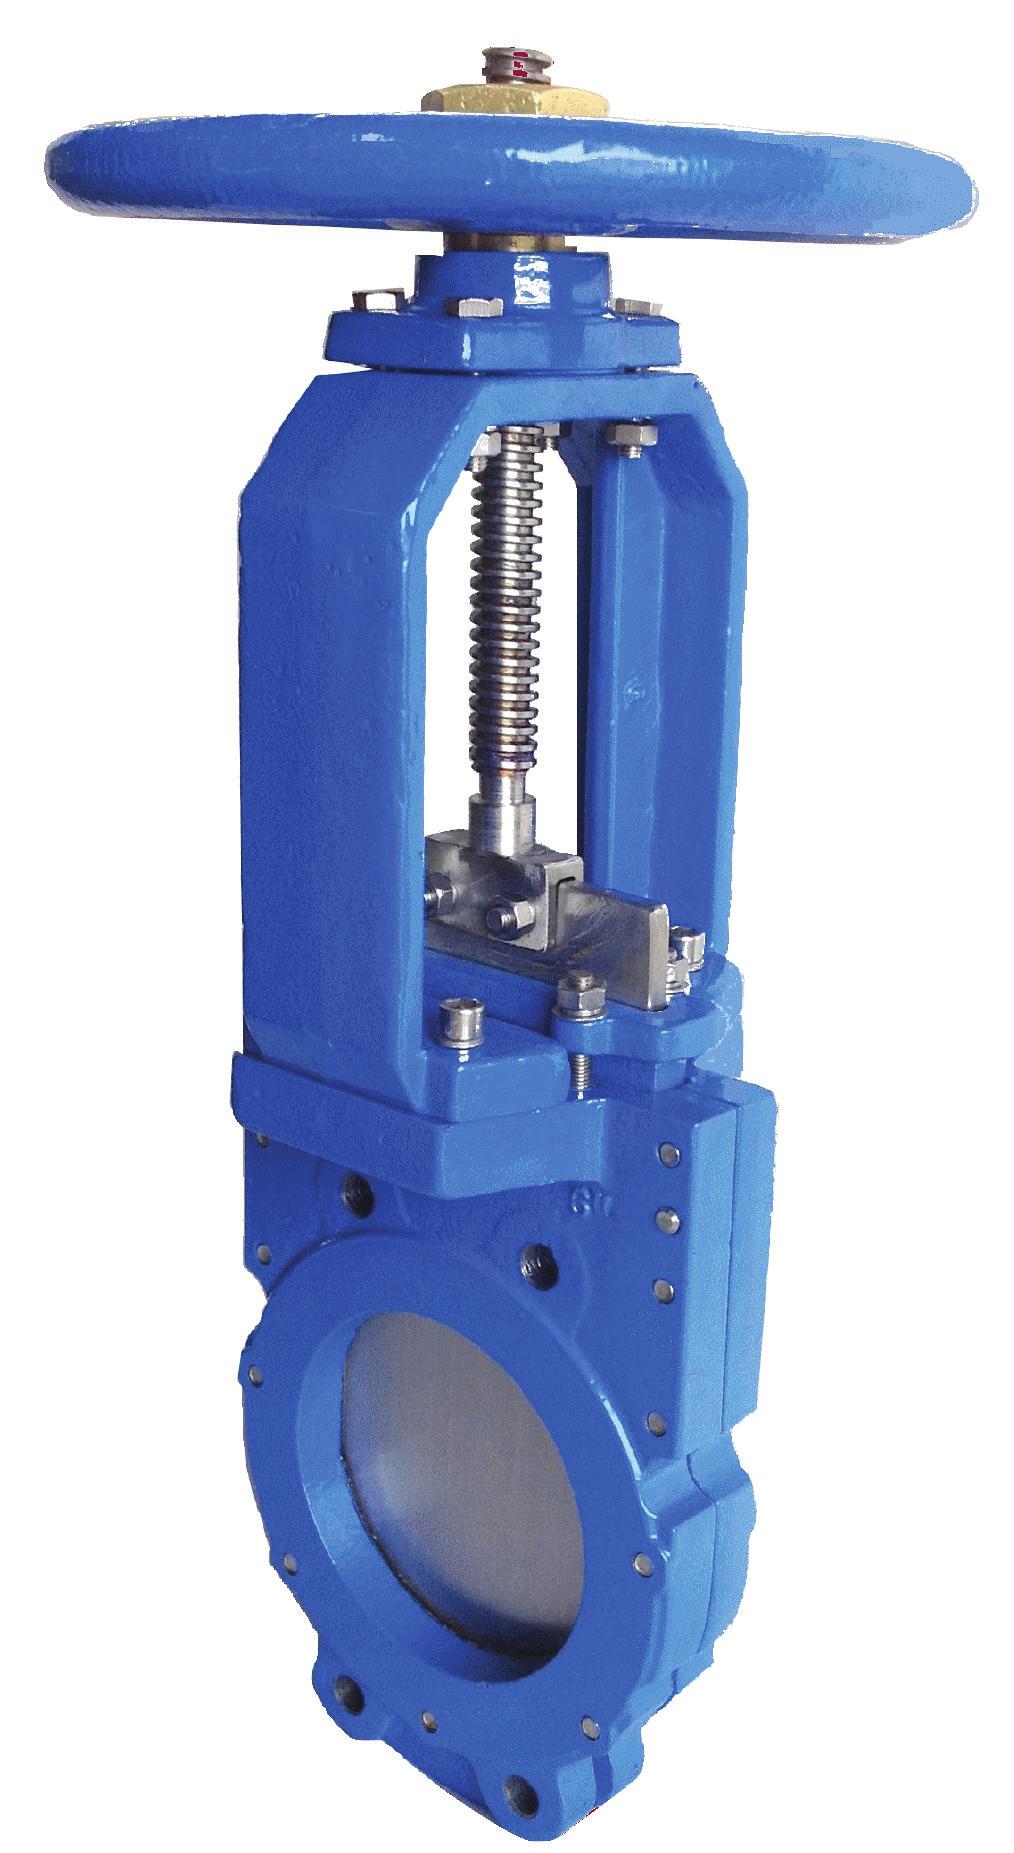 Figure 53 Ductile Iron Resilient Seated Knife Gate Valve Heavy duty cast ductile iron body, packing gland, and yoke for the most rugged service.